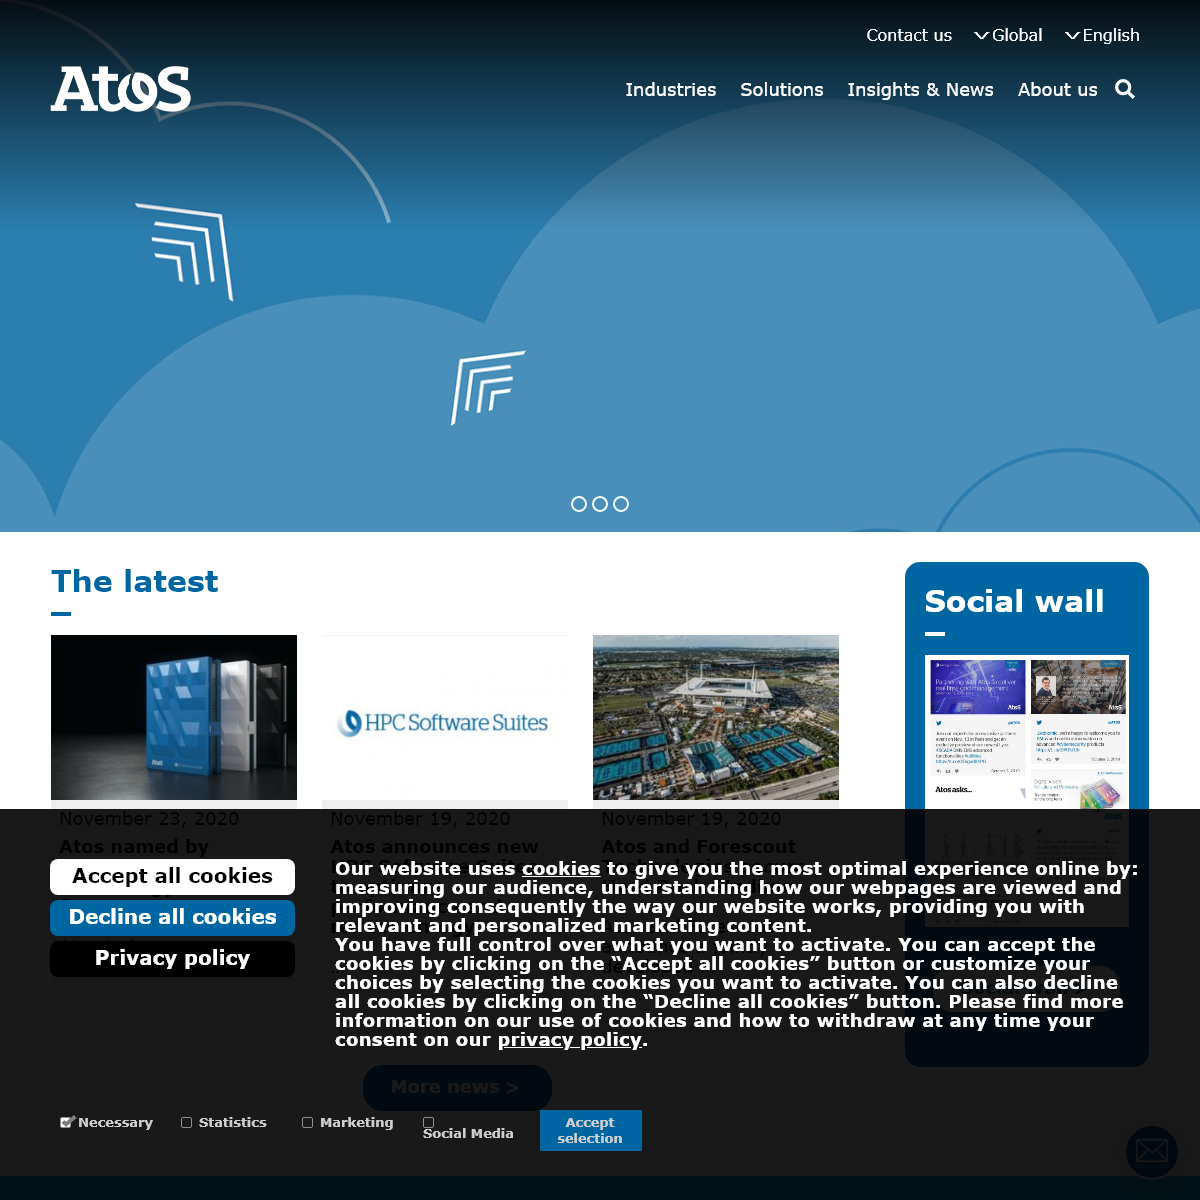 A complete backup of atos.net